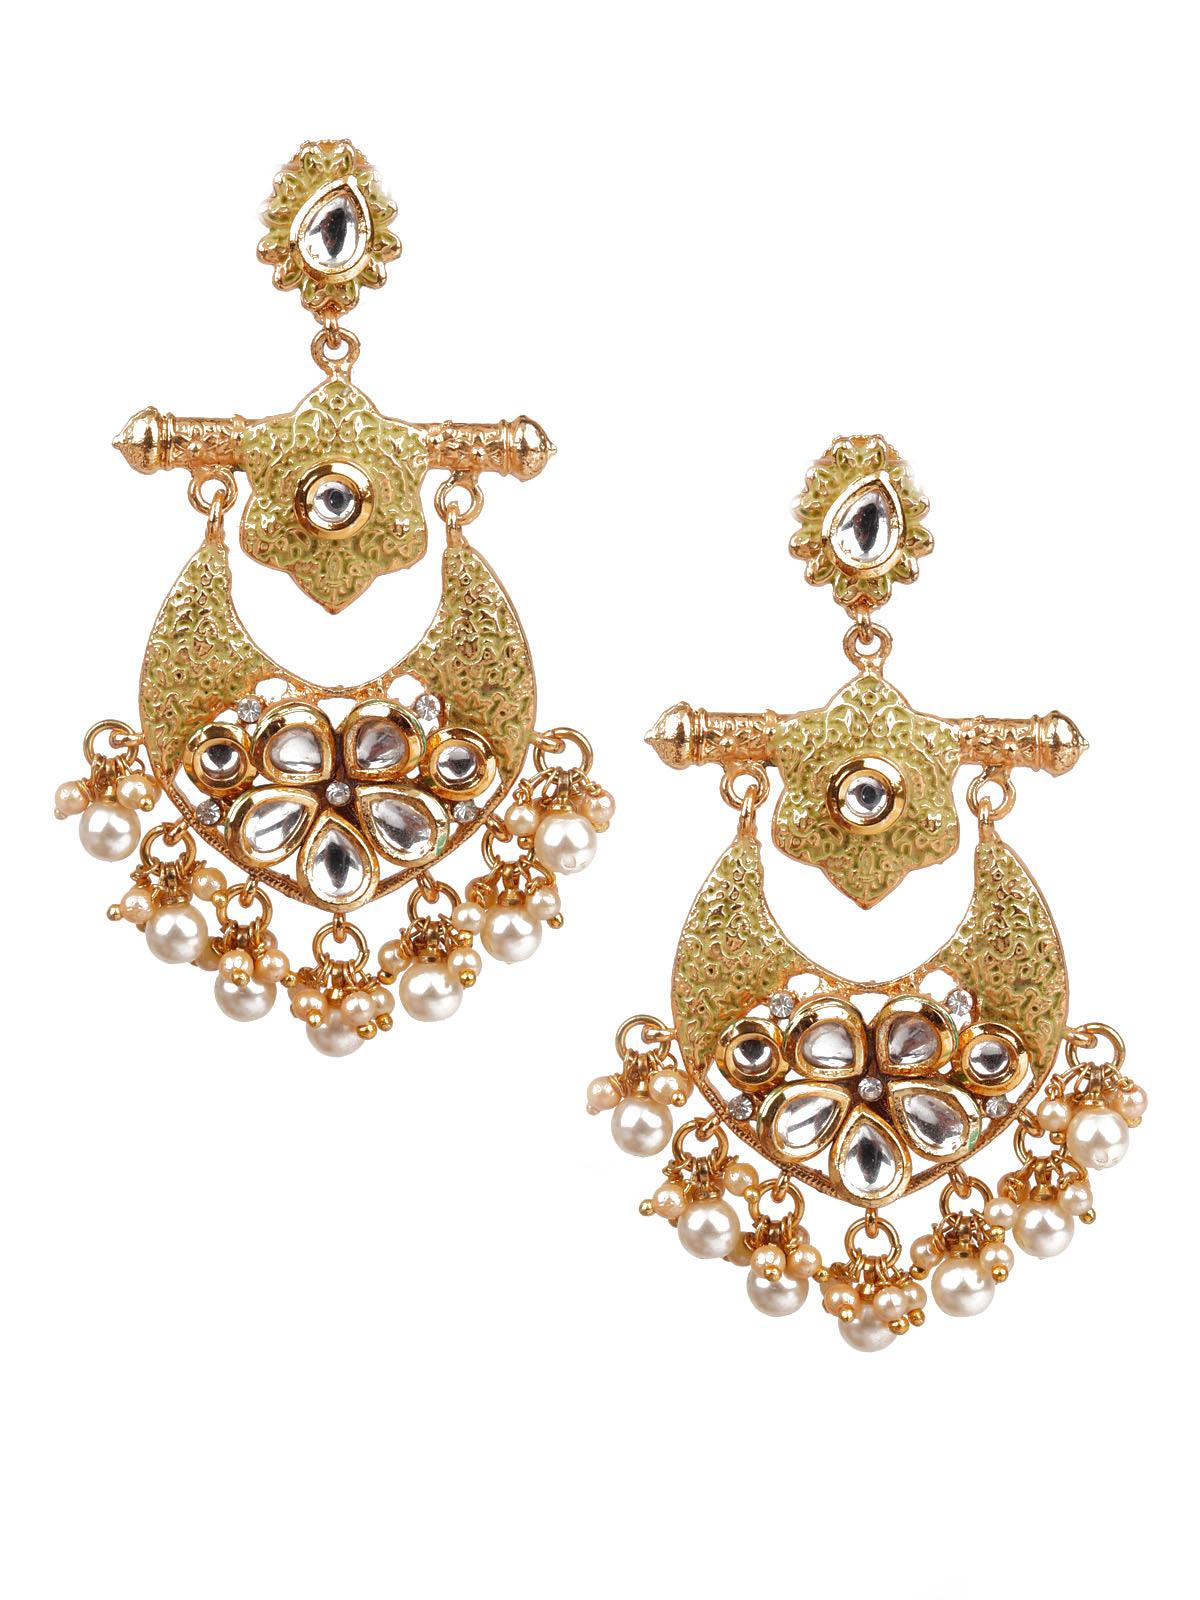 TRENDY GOLD AND GREEN EARRINGS - Odette